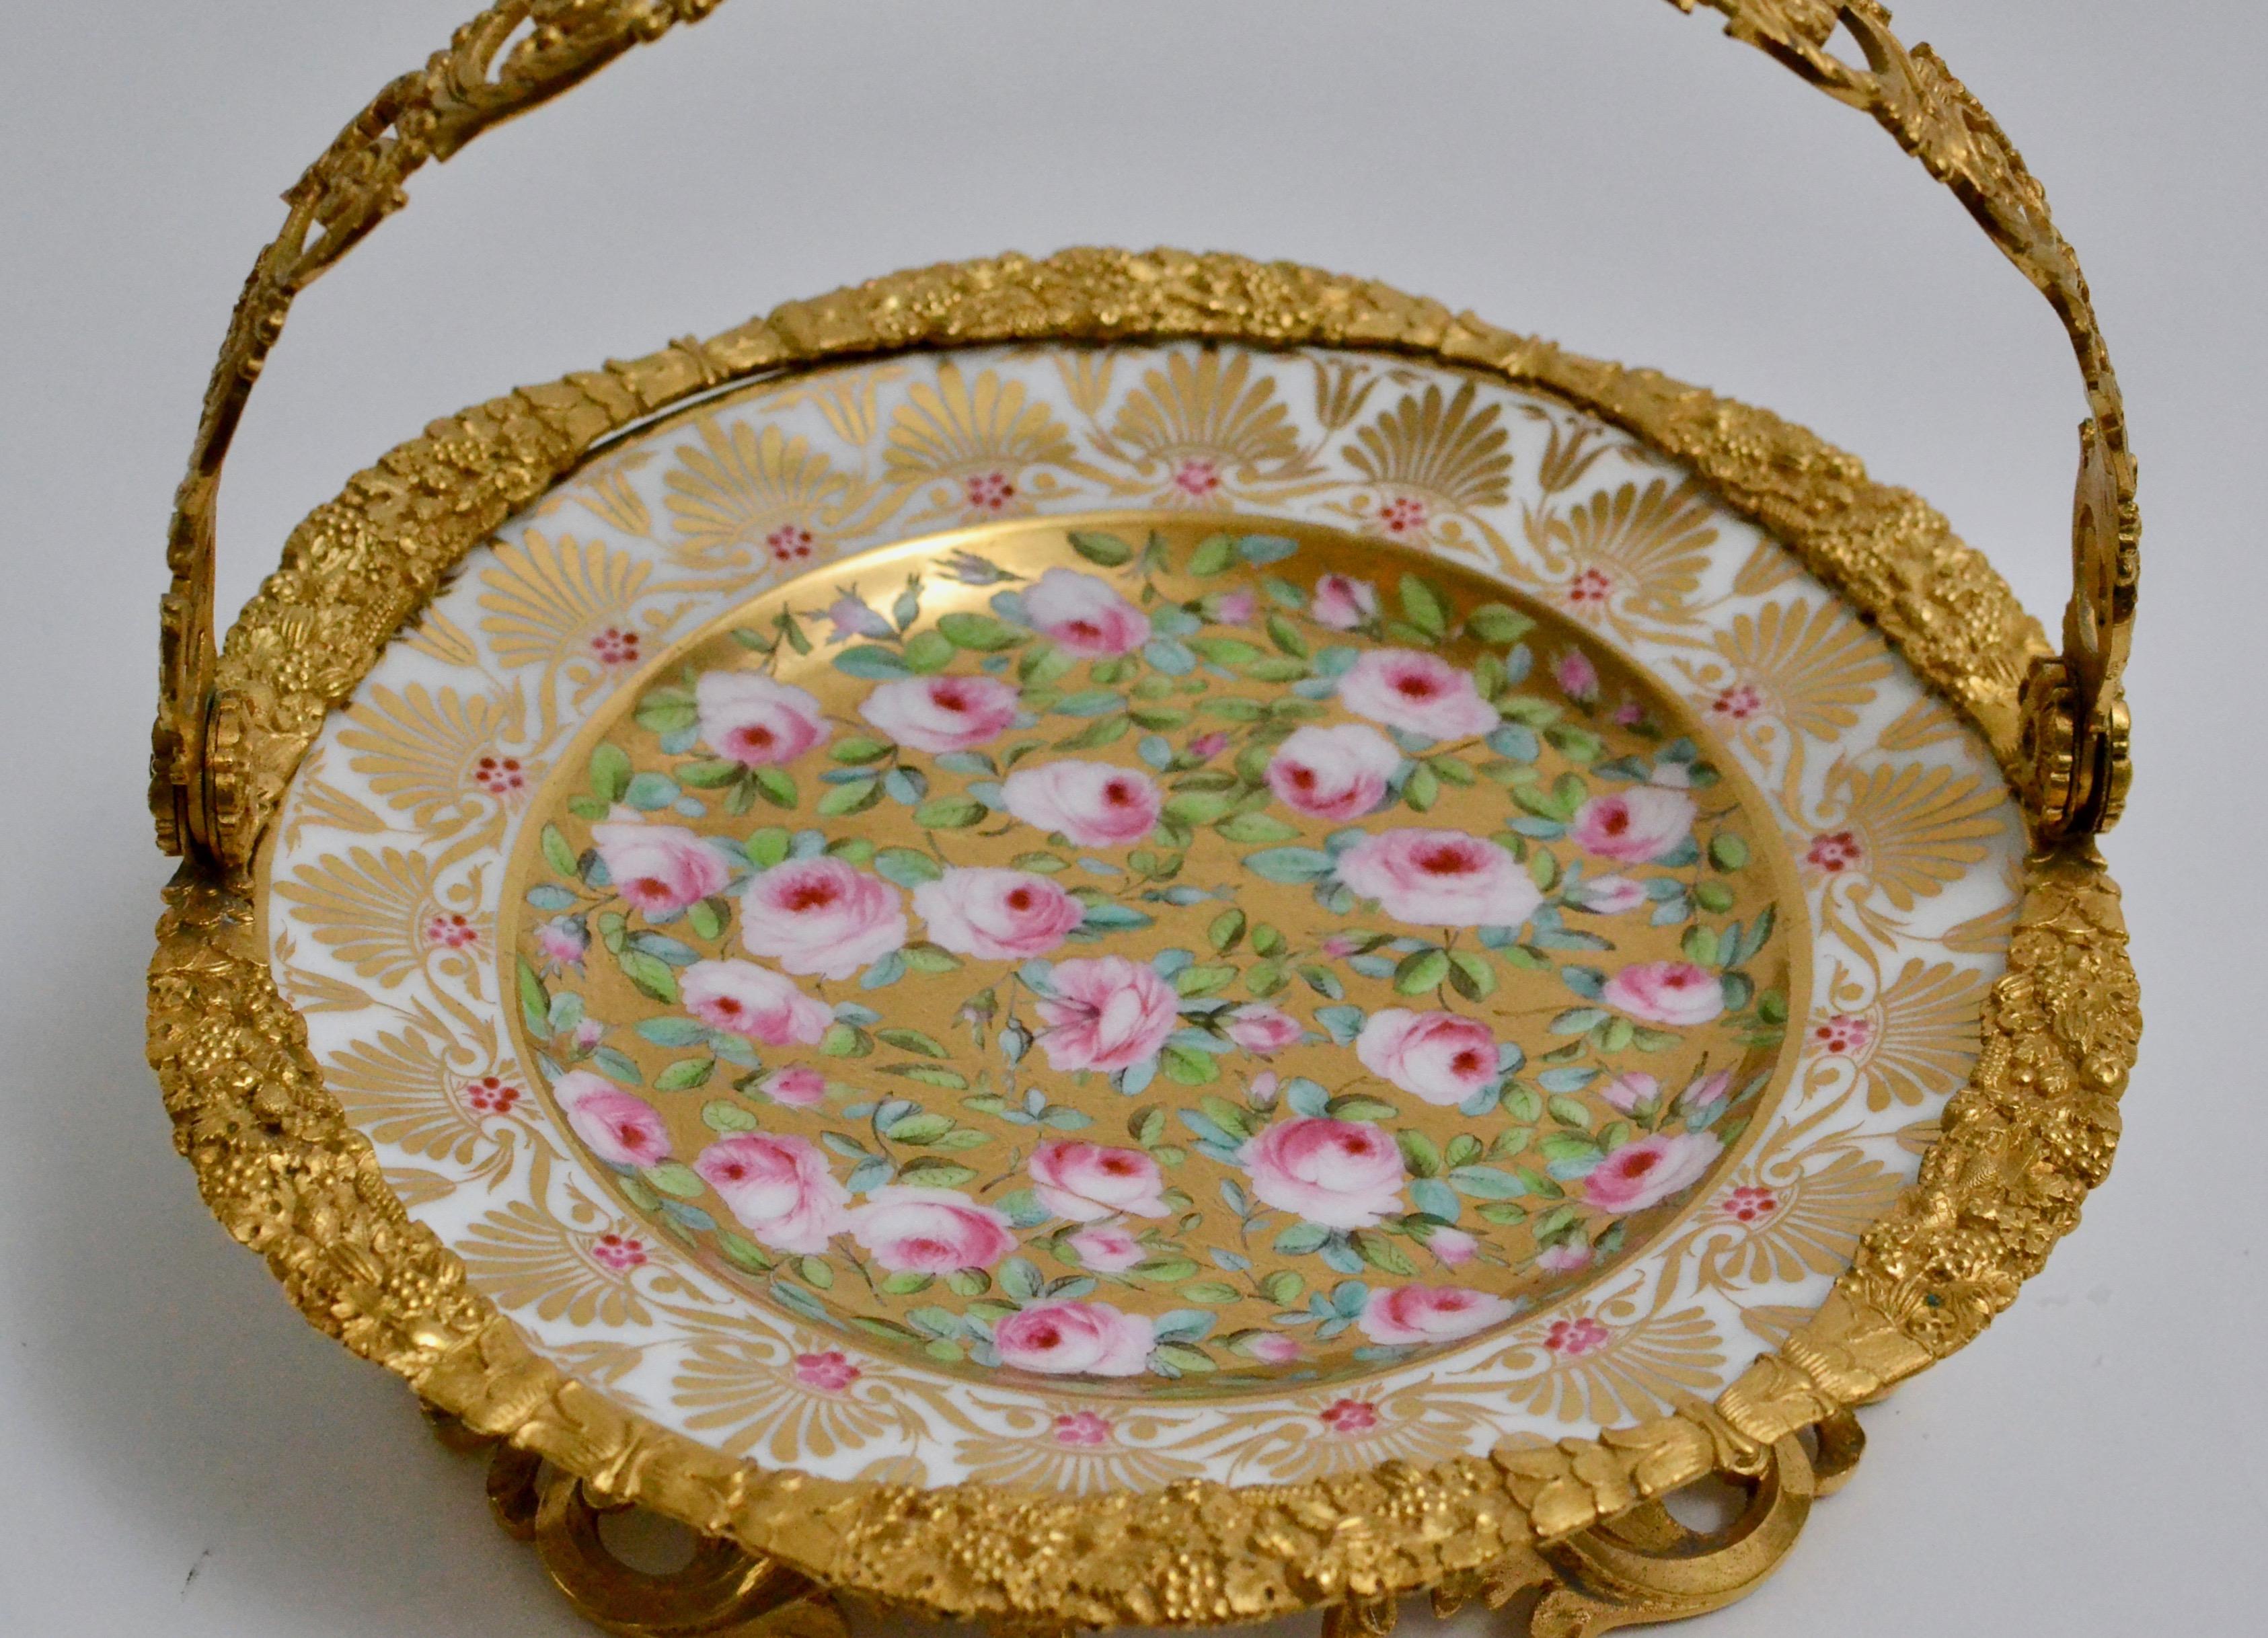 19th Century Cake Stand Ormolu Mounted Painted Porcelain Plate with a Gilt Bronze Handle